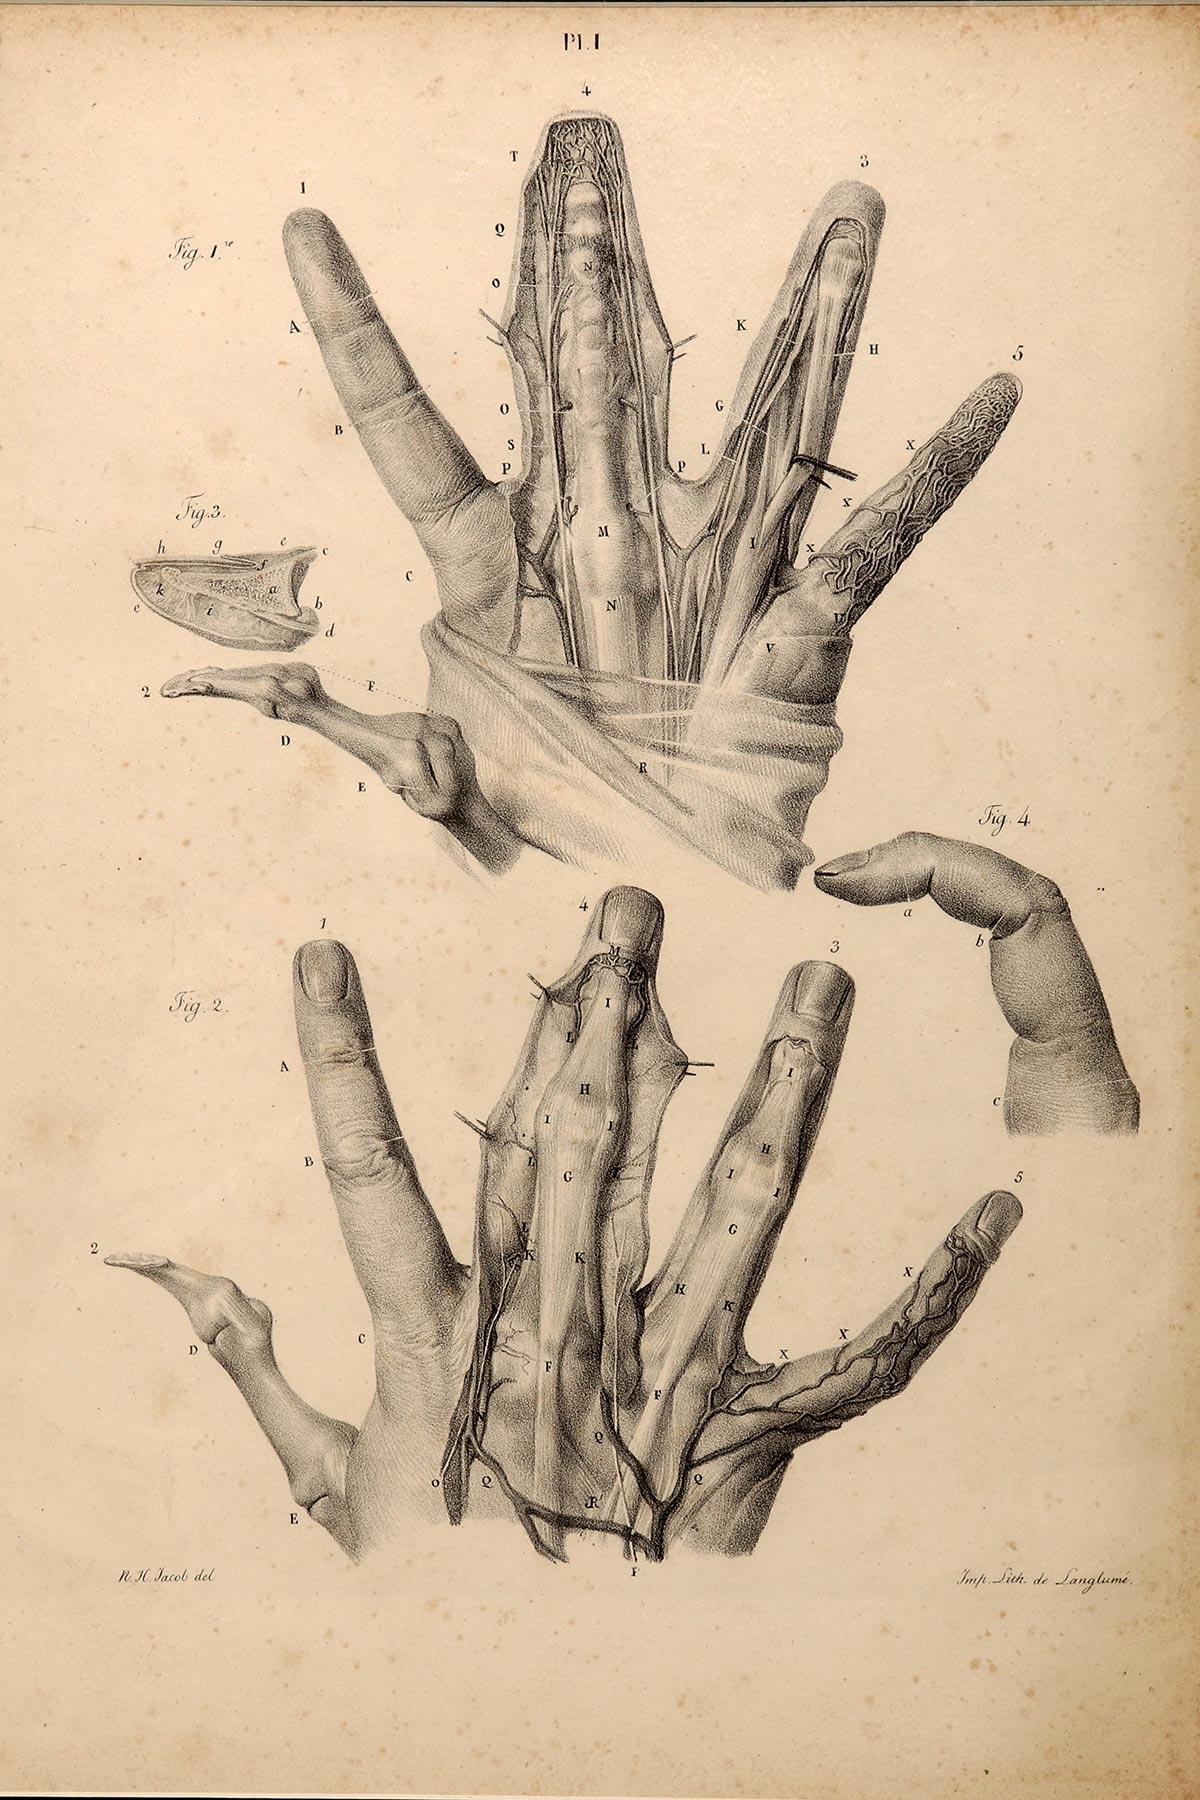 An anatomical lithographic print on paper, depicting the anatomical atlas of the hand. Black lacquered fir wood frame with golden ramin wood batting. N. H. Jacob, Paris mid-19th century.